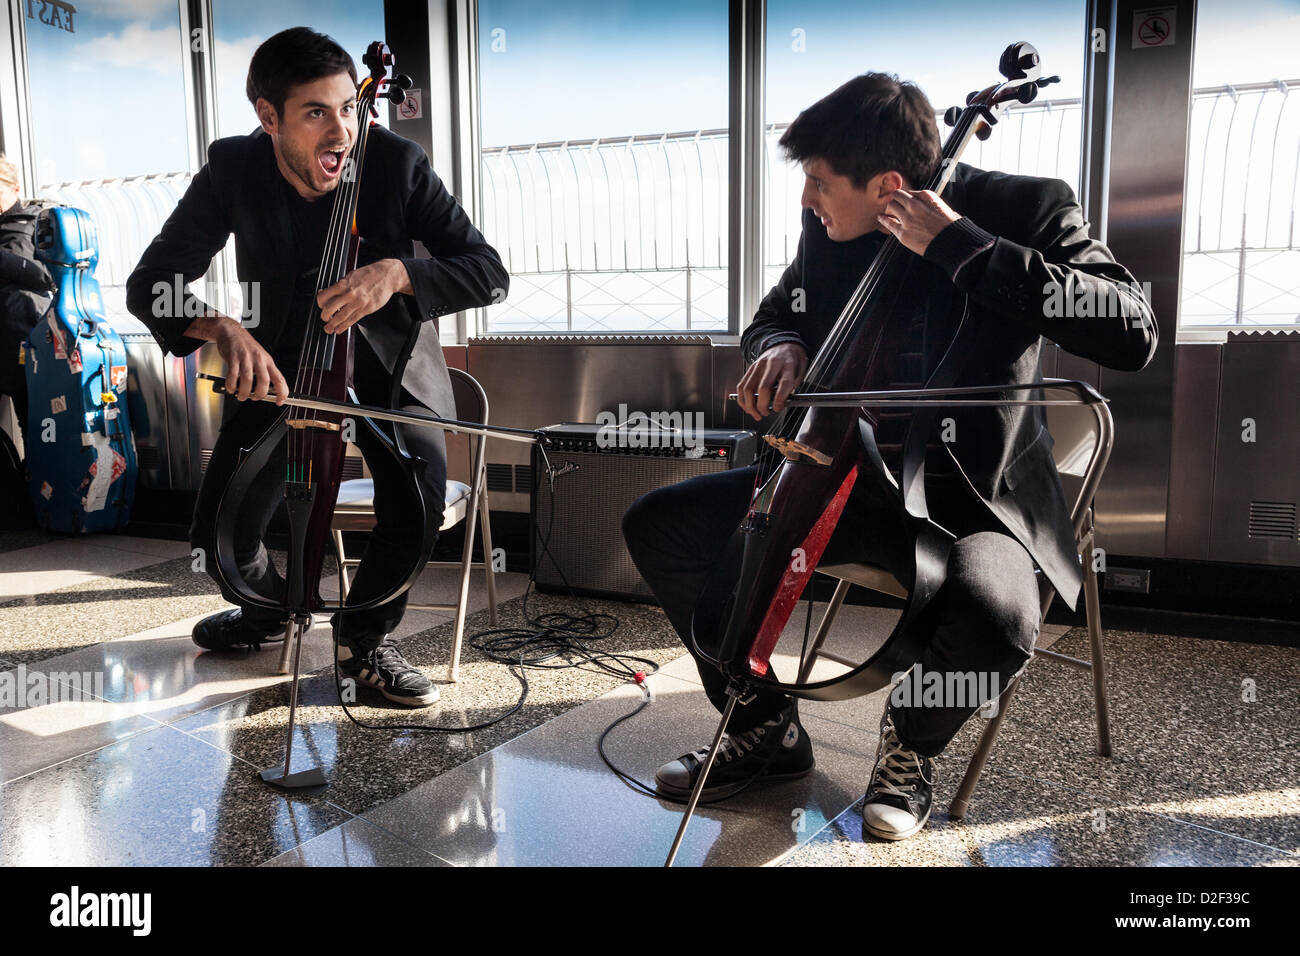 2 Violoncelli Stjepan Hauser Luka Sulic am 86. des Empire State Building Stock Sternwarte hier in New York City, New York, USA. Stockfoto